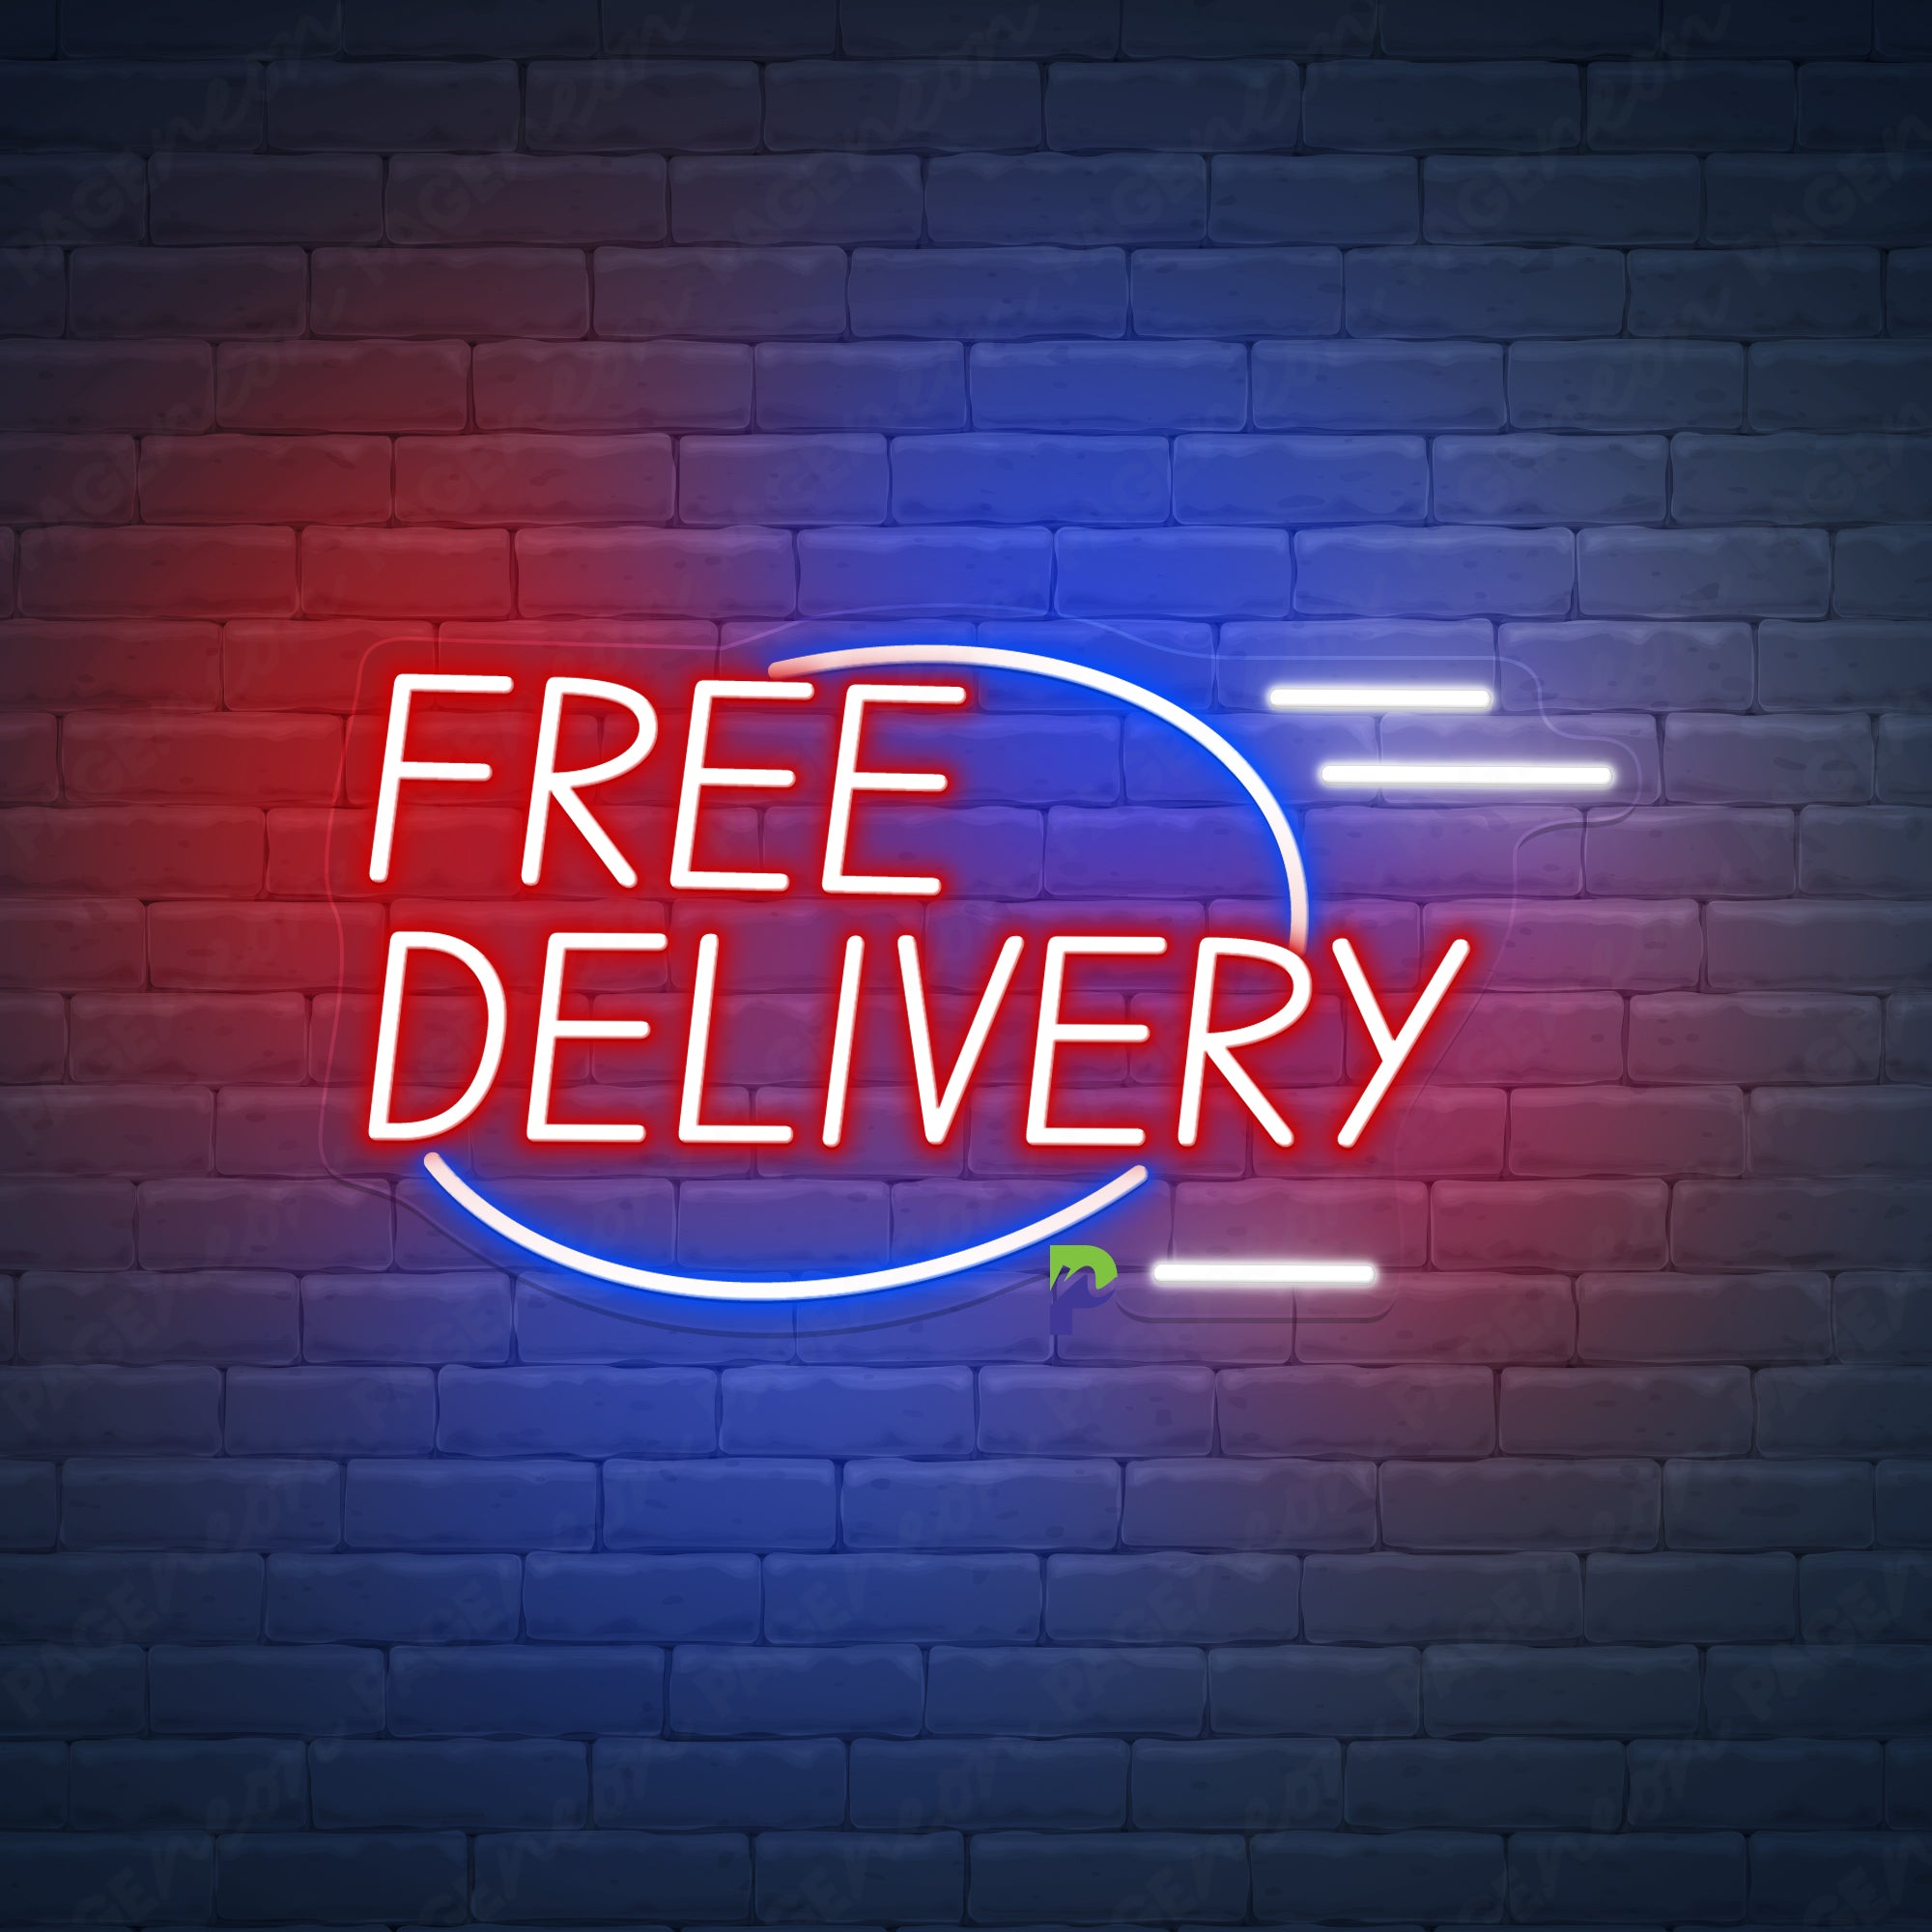 Free Delivery Neon Signs Business Led Light